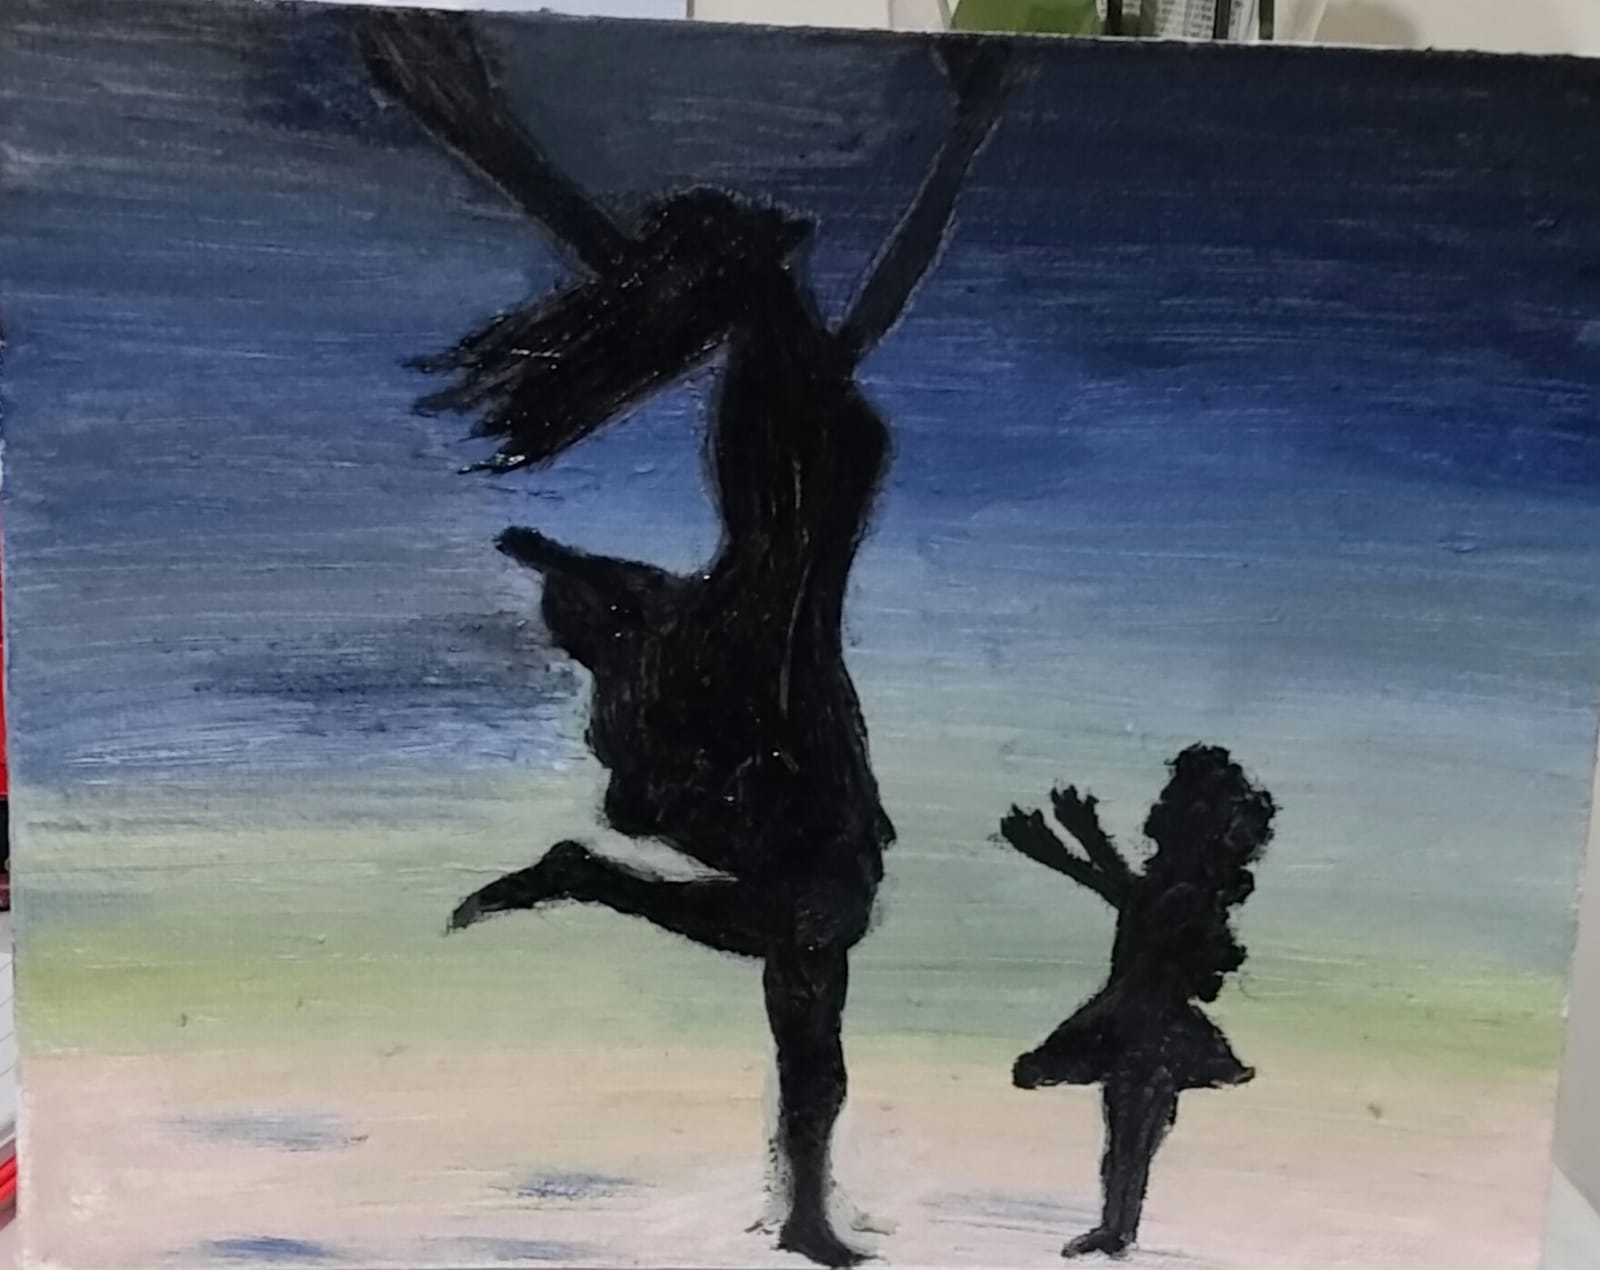 A silouette of a mother with her arms reached to the air stands before a little girl silouette with her arms stretched out to her. The sky is dark behind them and the image creates a sense of intense unease, loss and desperation.